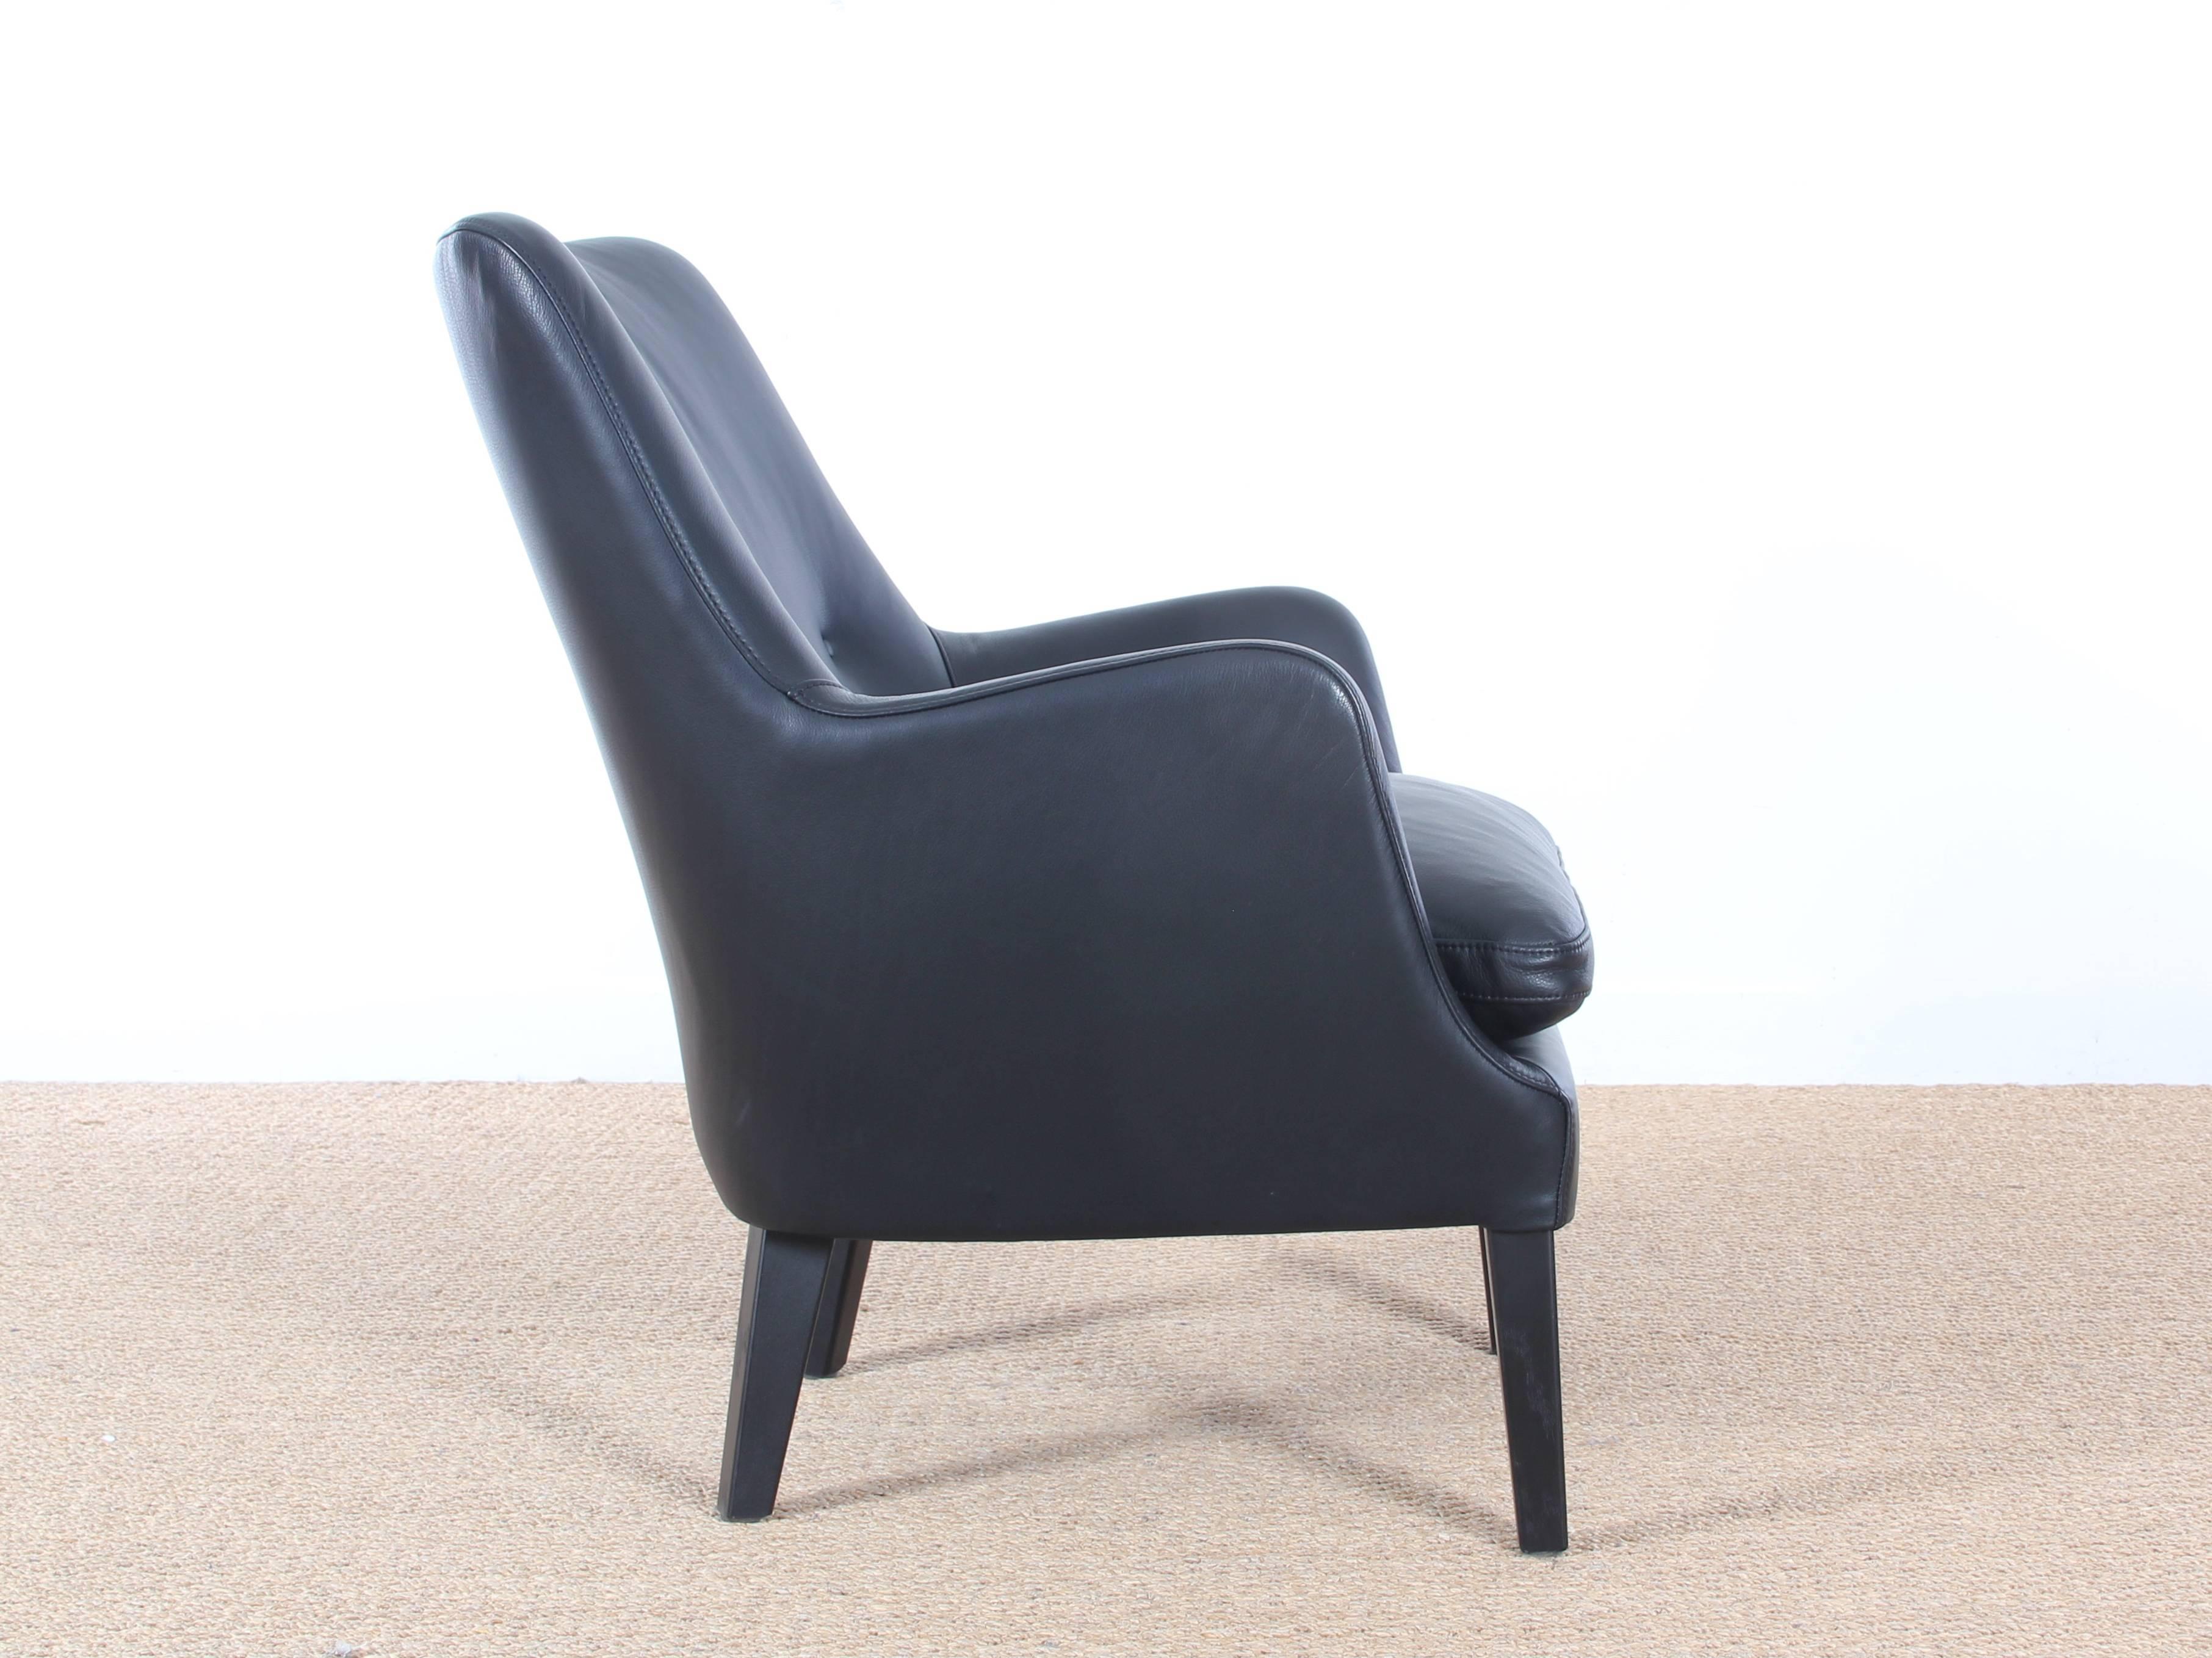 Mid-Century Modern Scandinavian lounge chair by Arne Vodder AV 53 new release. On demand only. Delivery time: Six weeks. Available in five different colors on leather.